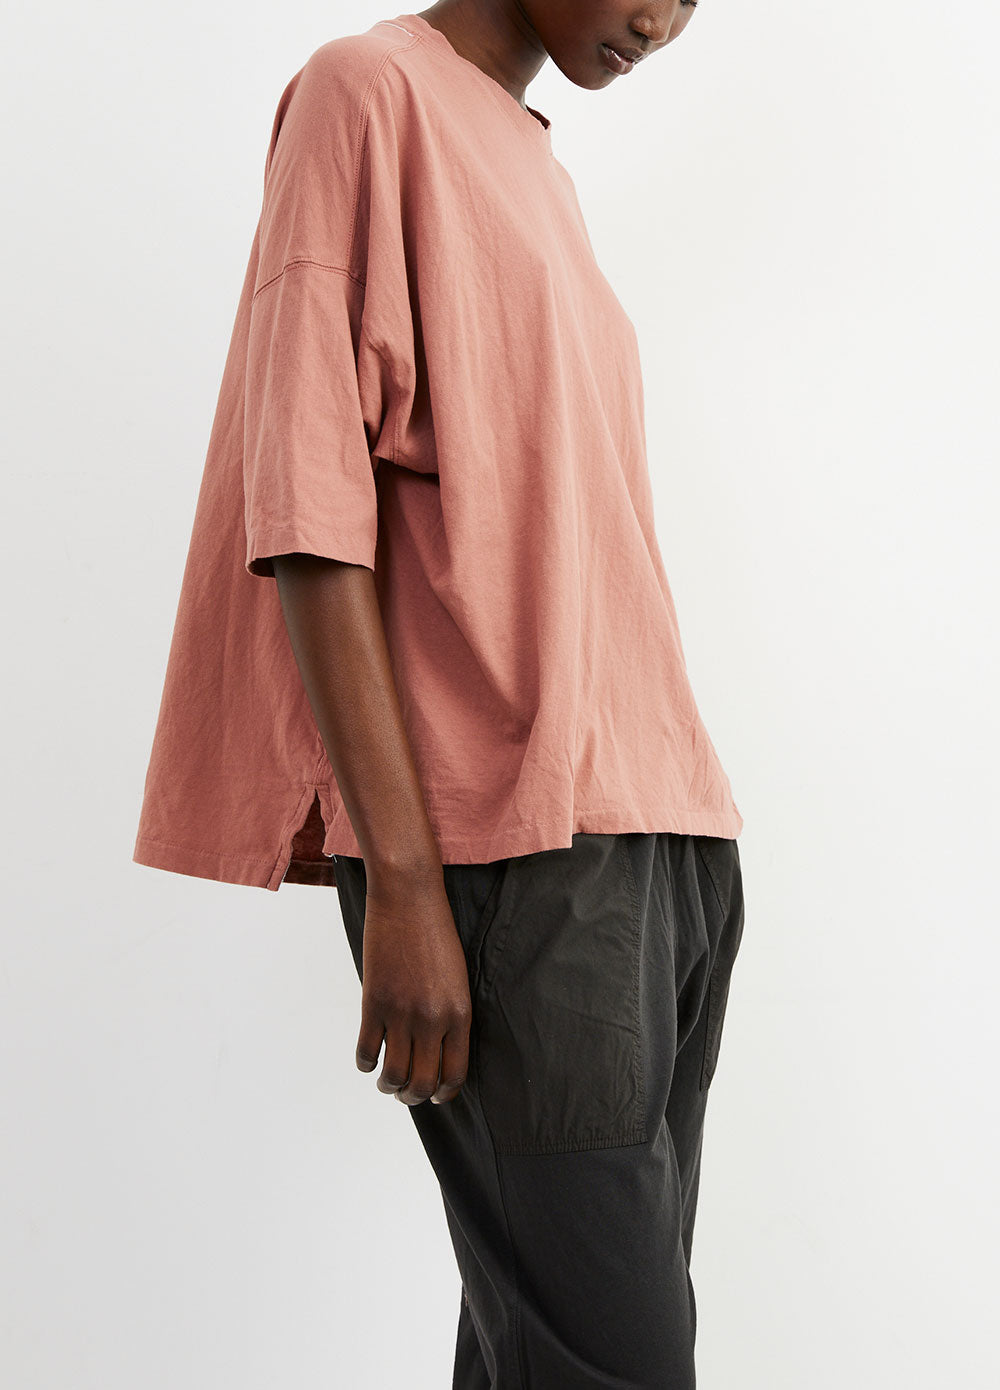 Slouch Side Step T-Shirt